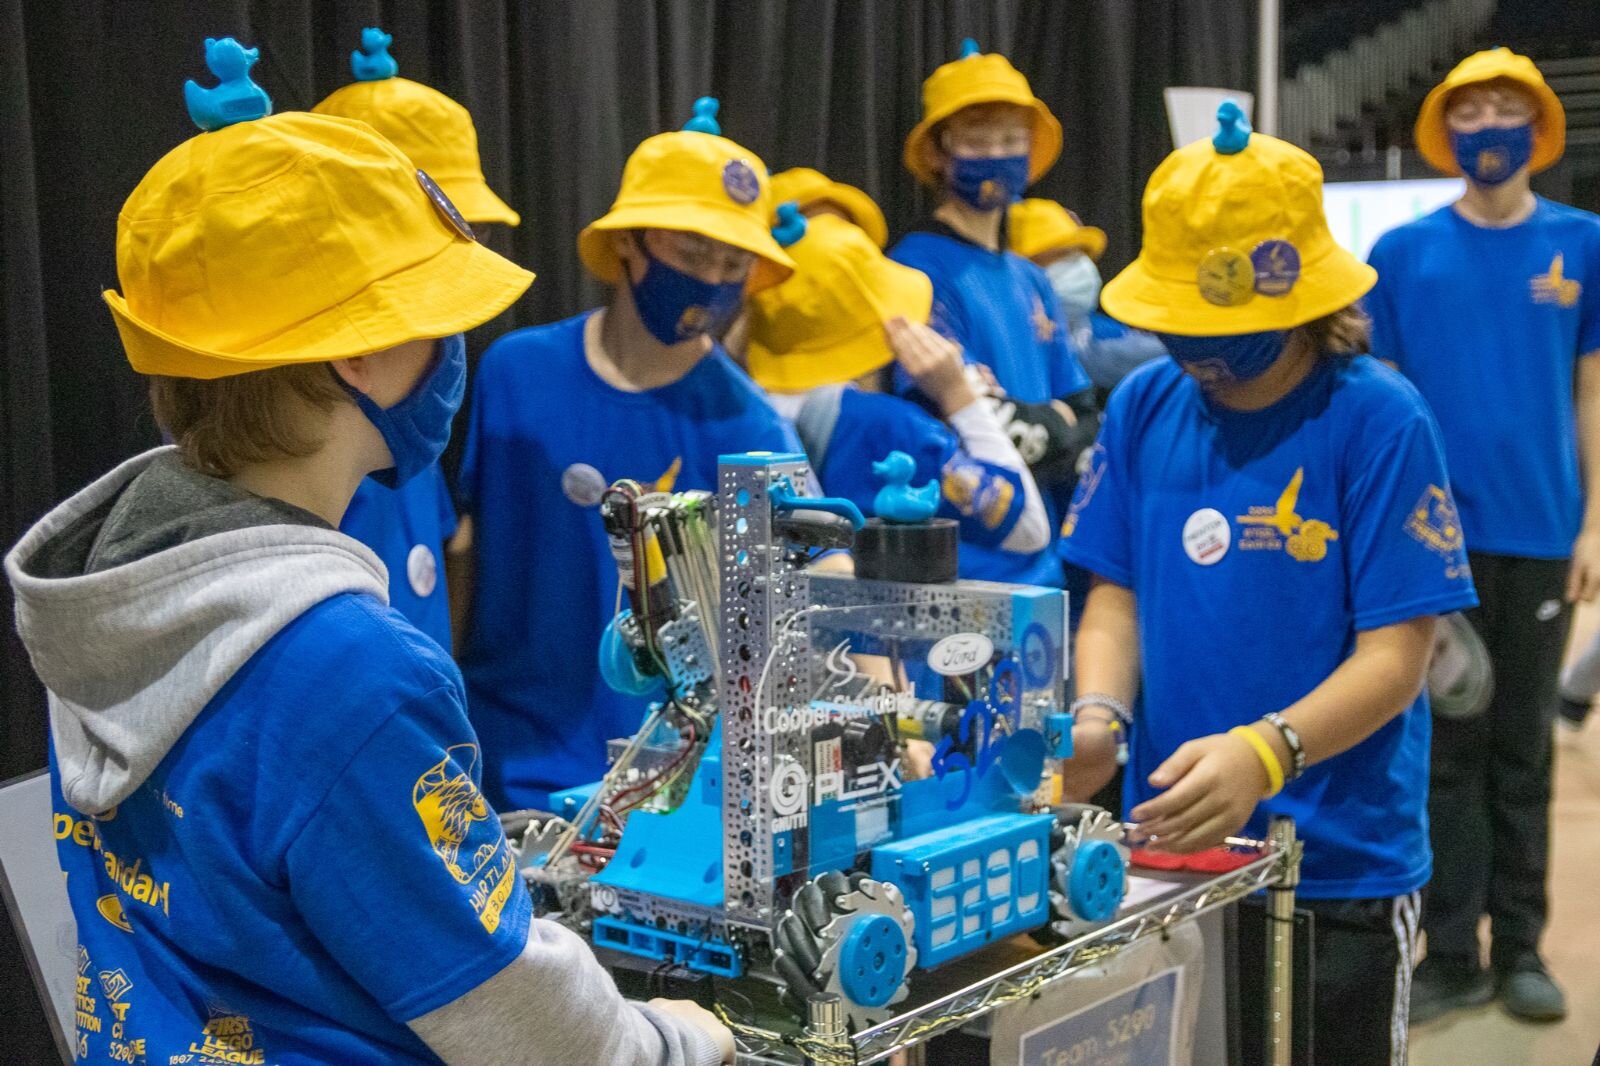 Kellogg Arena has hosted the statewide middle school robotics competition.